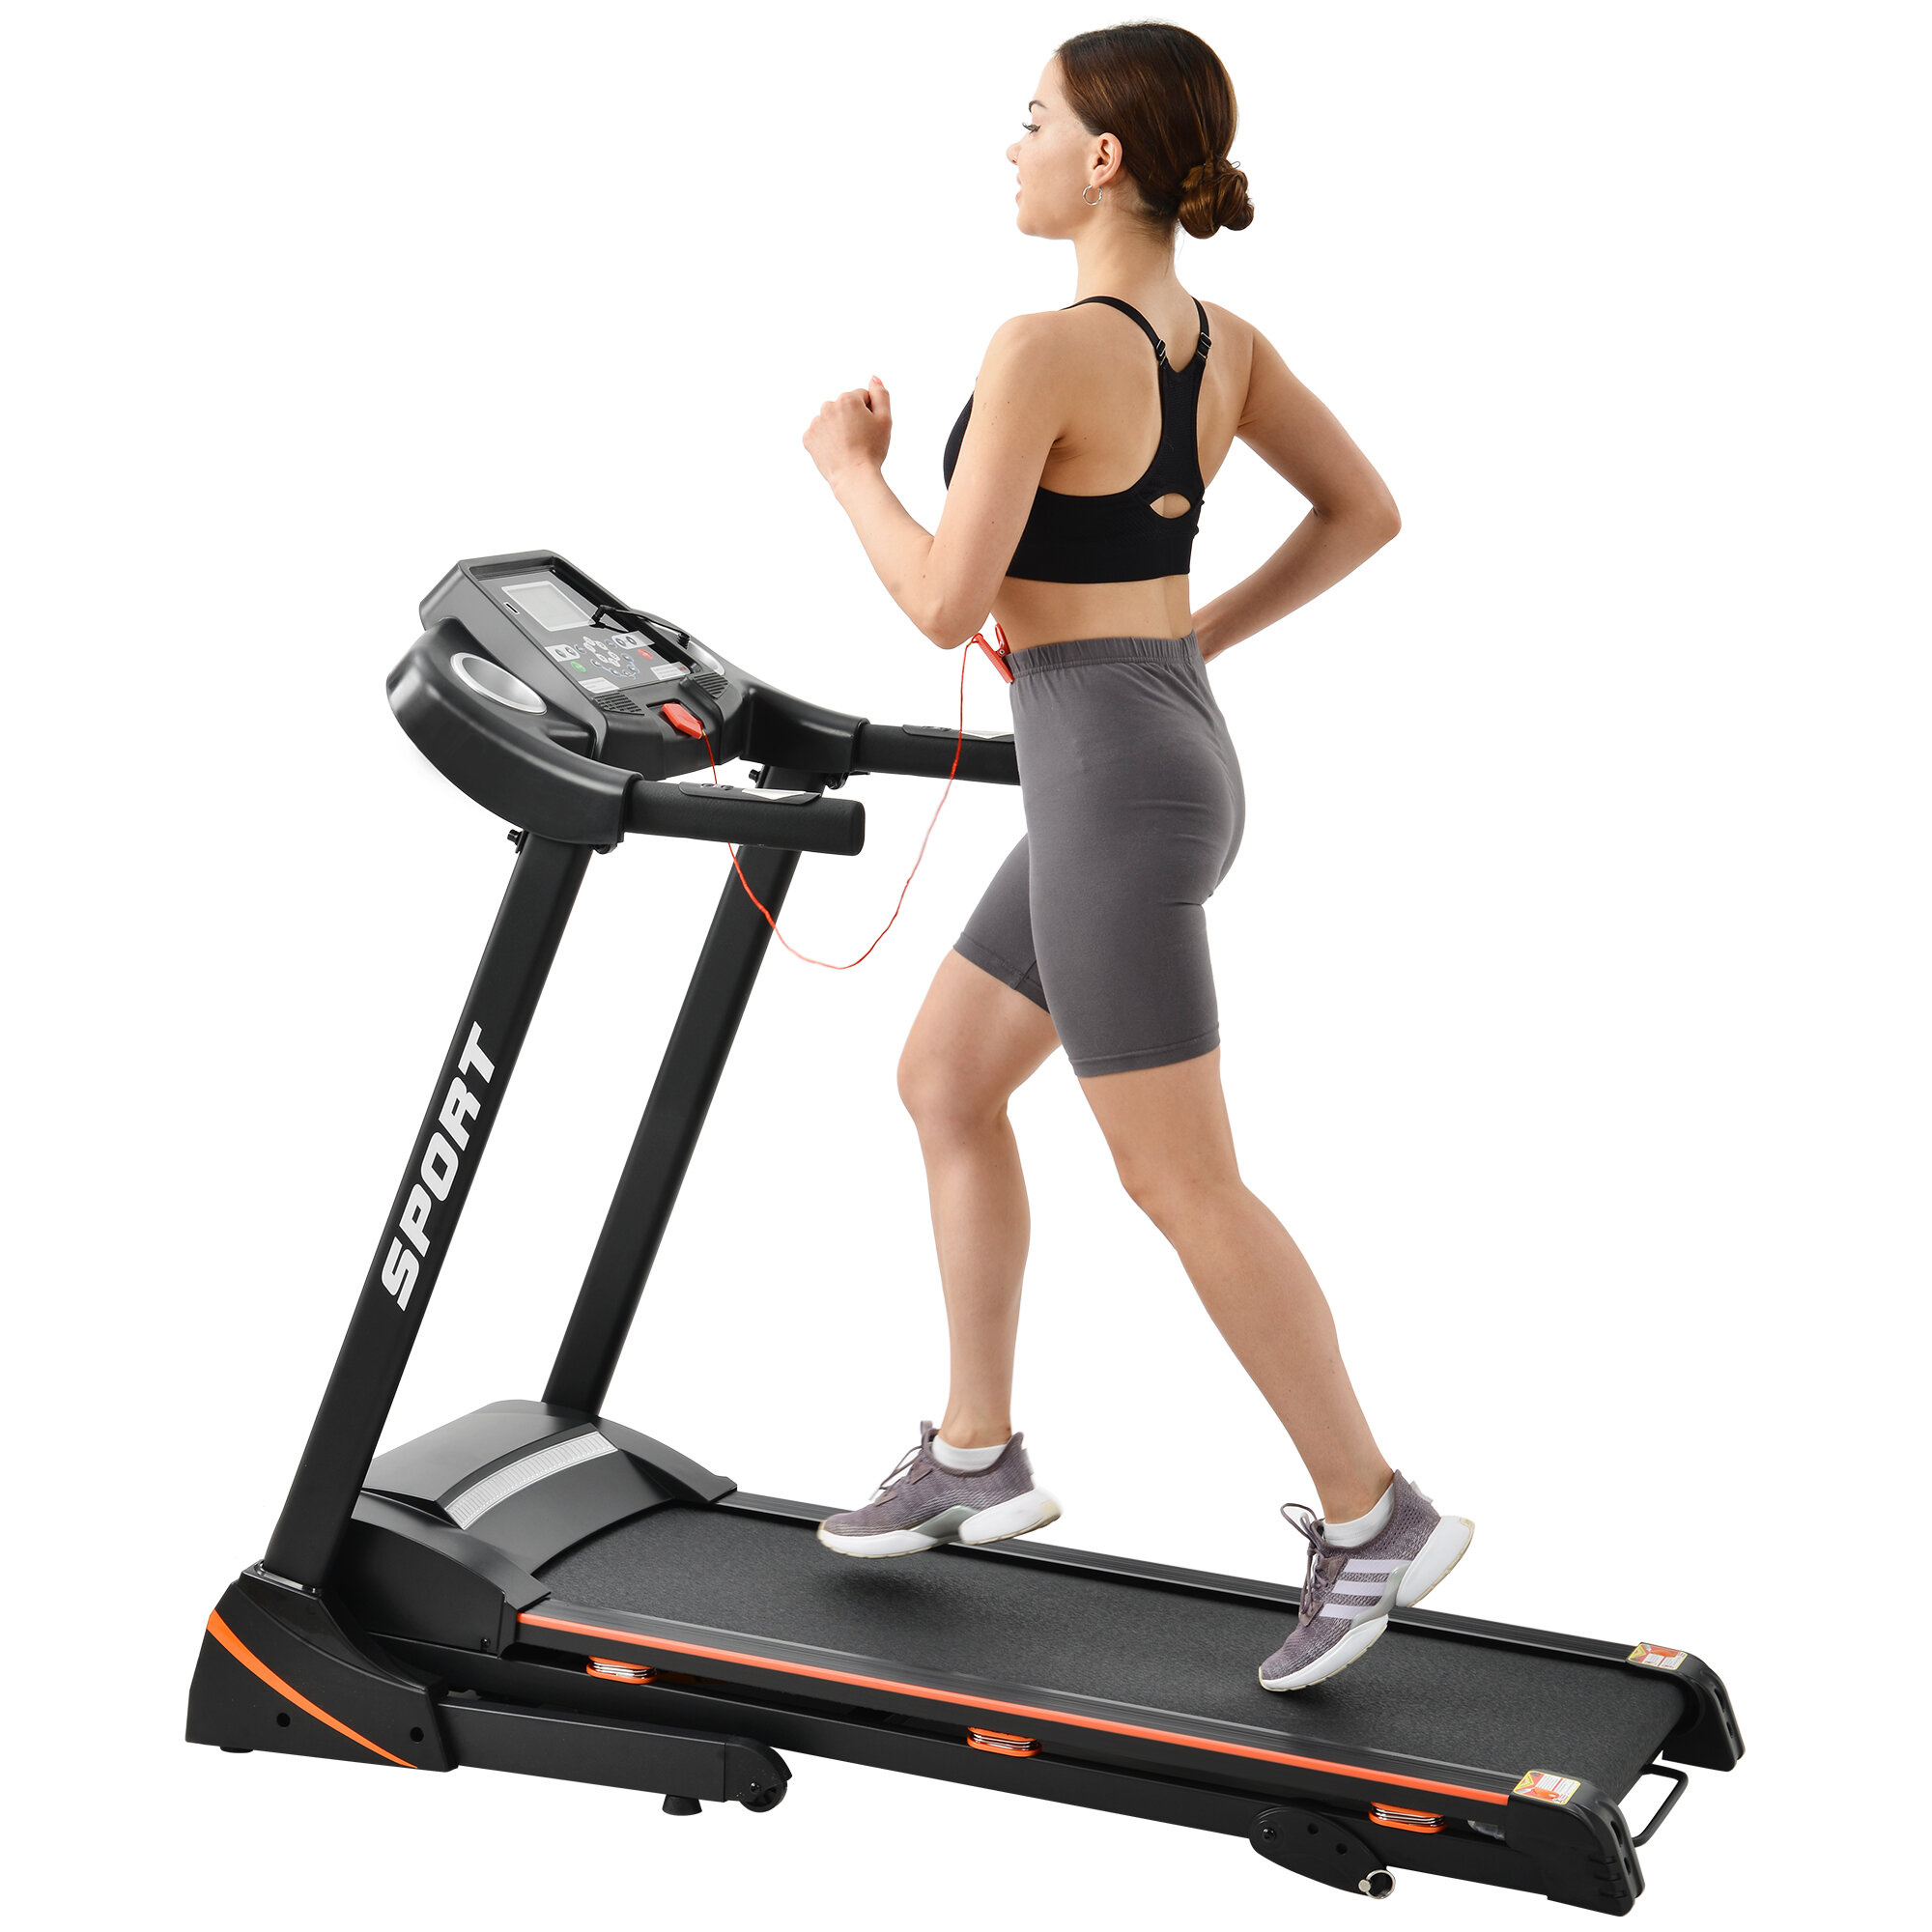 Image of [USA Direct] 148km/h 35HP Folding Treadmill 12 Programs Electric Running Machine Fitness Gym Home Max Load 330lbs US P